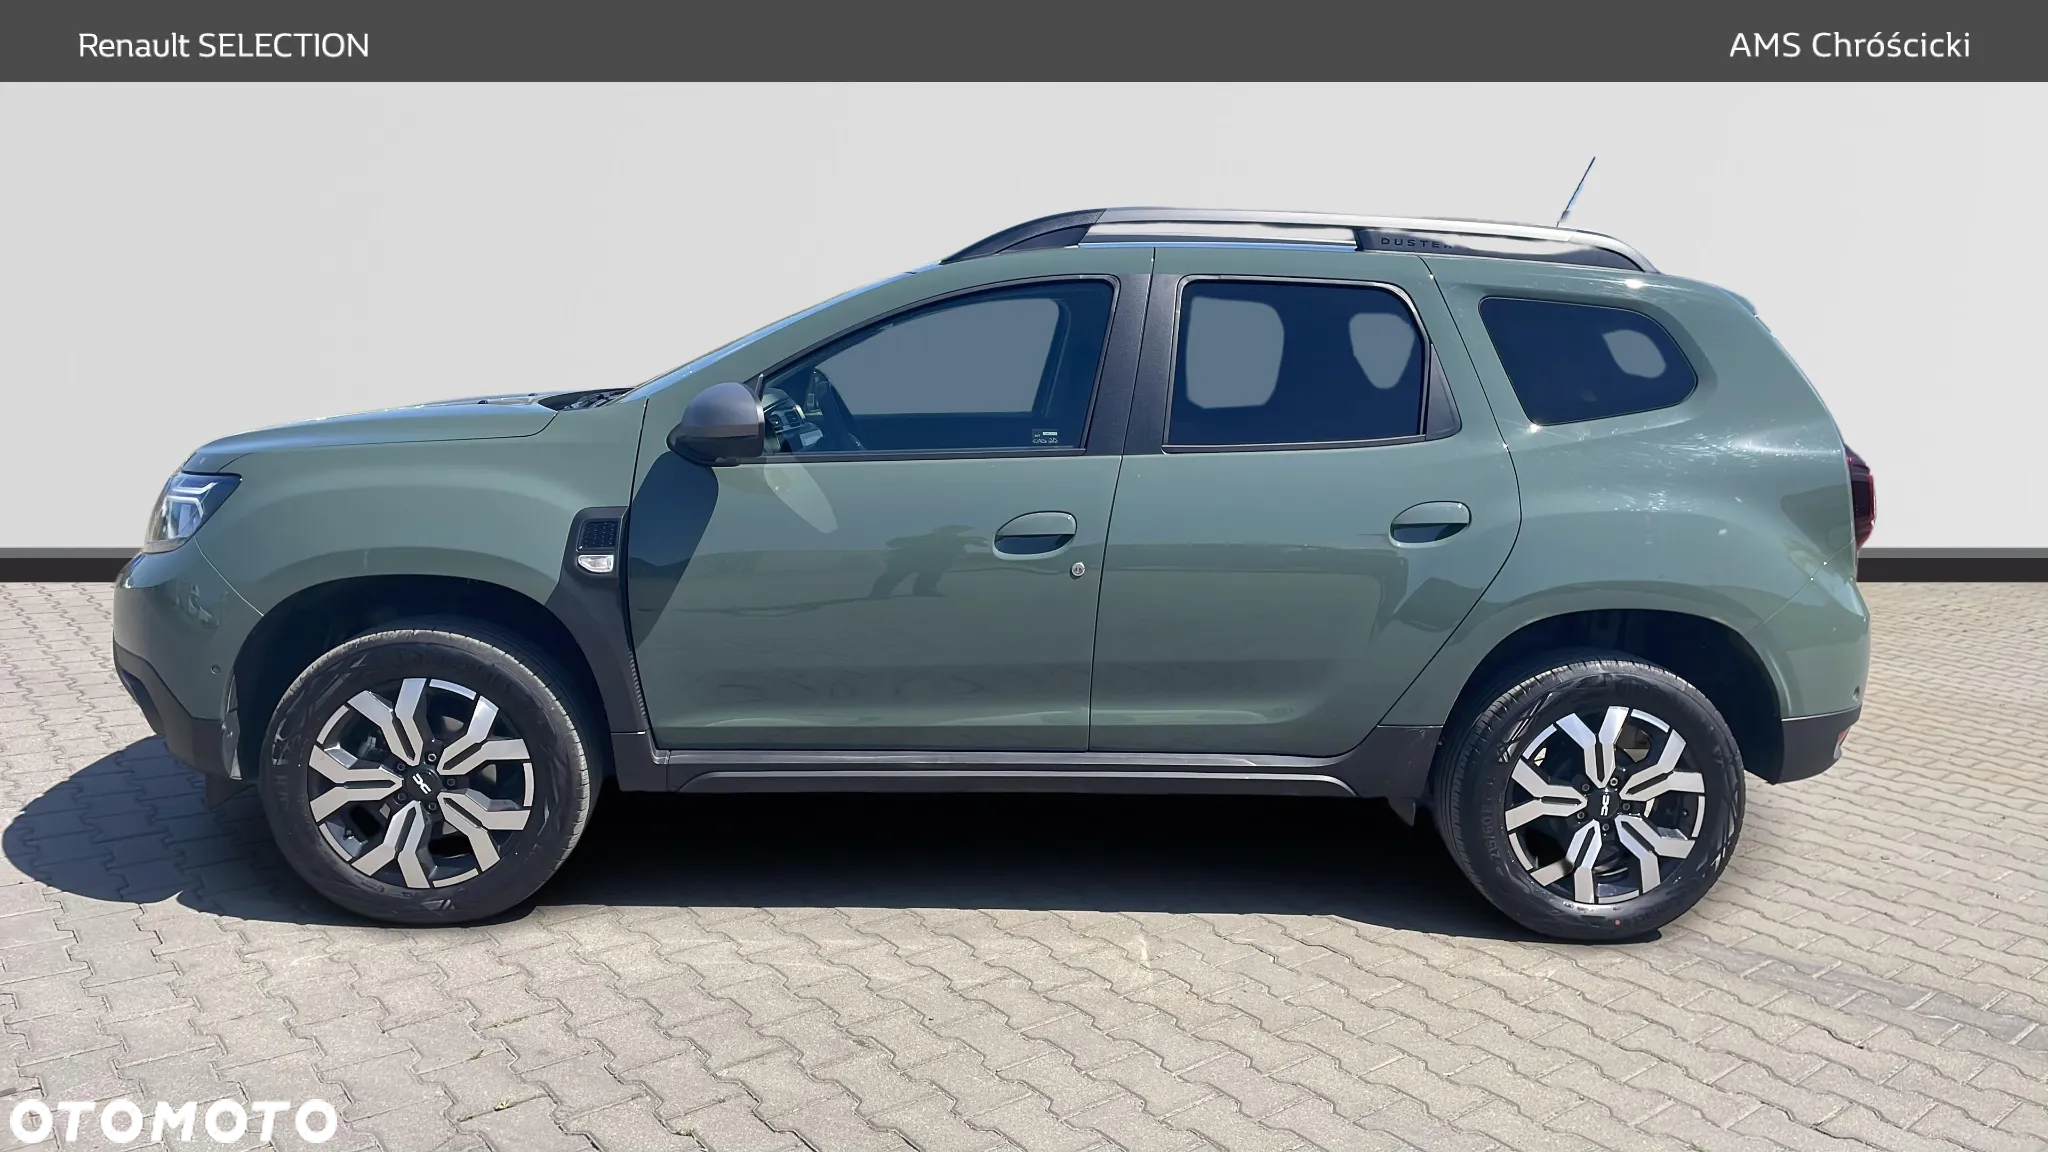 Dacia Duster 1.3 TCe Journey+ - 2